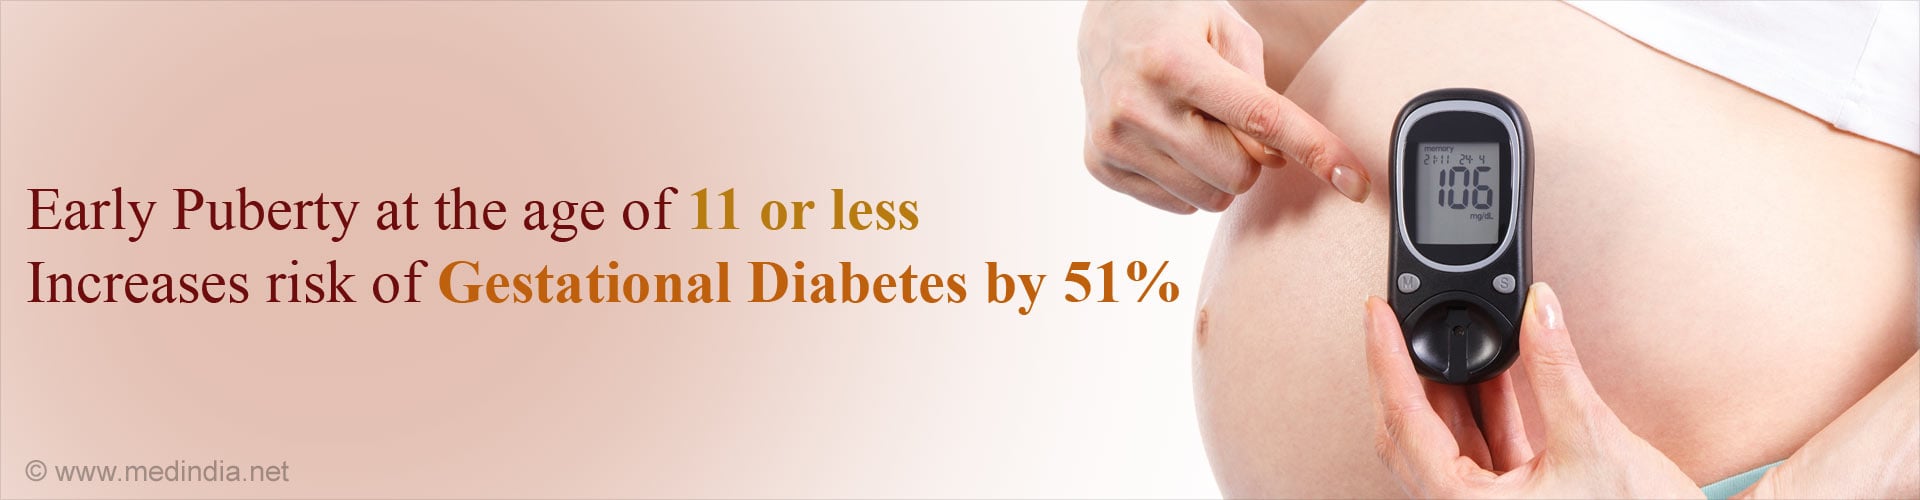 Early puberty at the age of 11 or less increases risk of gestational diabetes by 51%